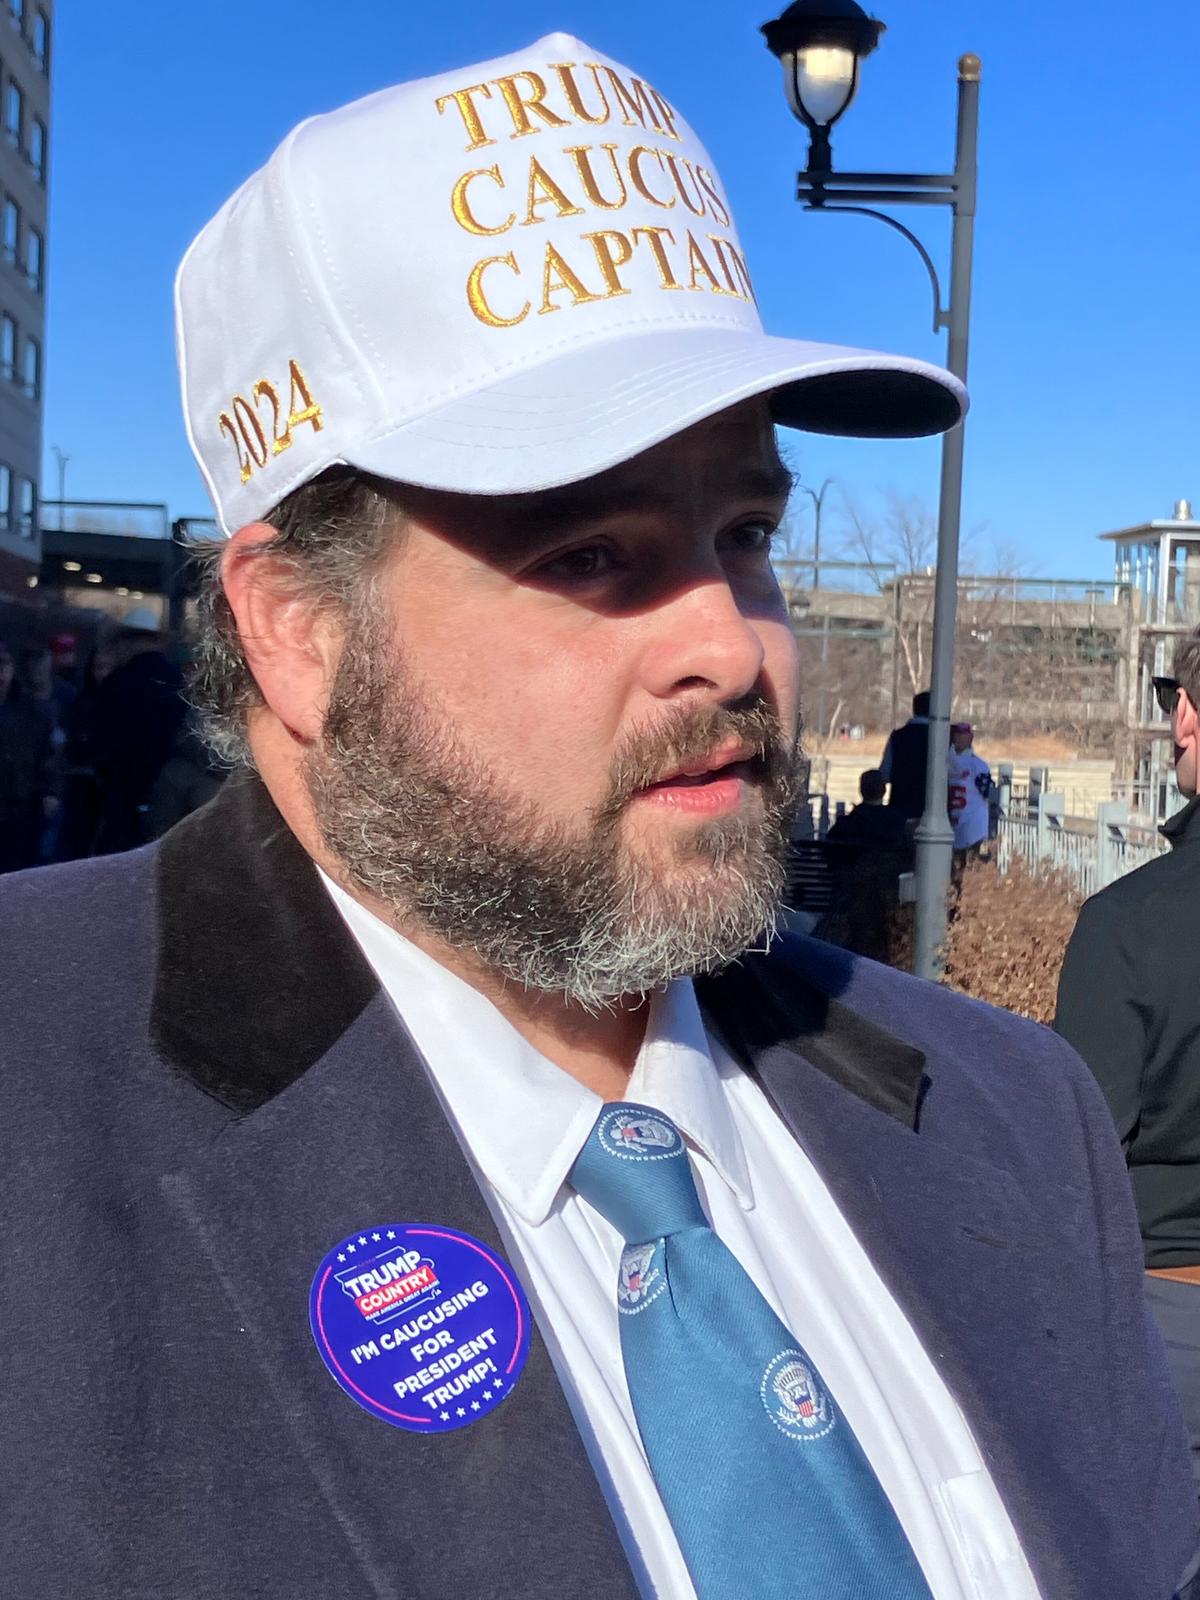 Nathaniel Gavronsky of Wayne County, Iowa, wears a "Trump Caucus Captain" hat outside a commit-to-caucus rally for former President Donald Trump in Coralville, Iowa, on Dec. 13, 2023. (Janice Hisle/The Epoch Times)